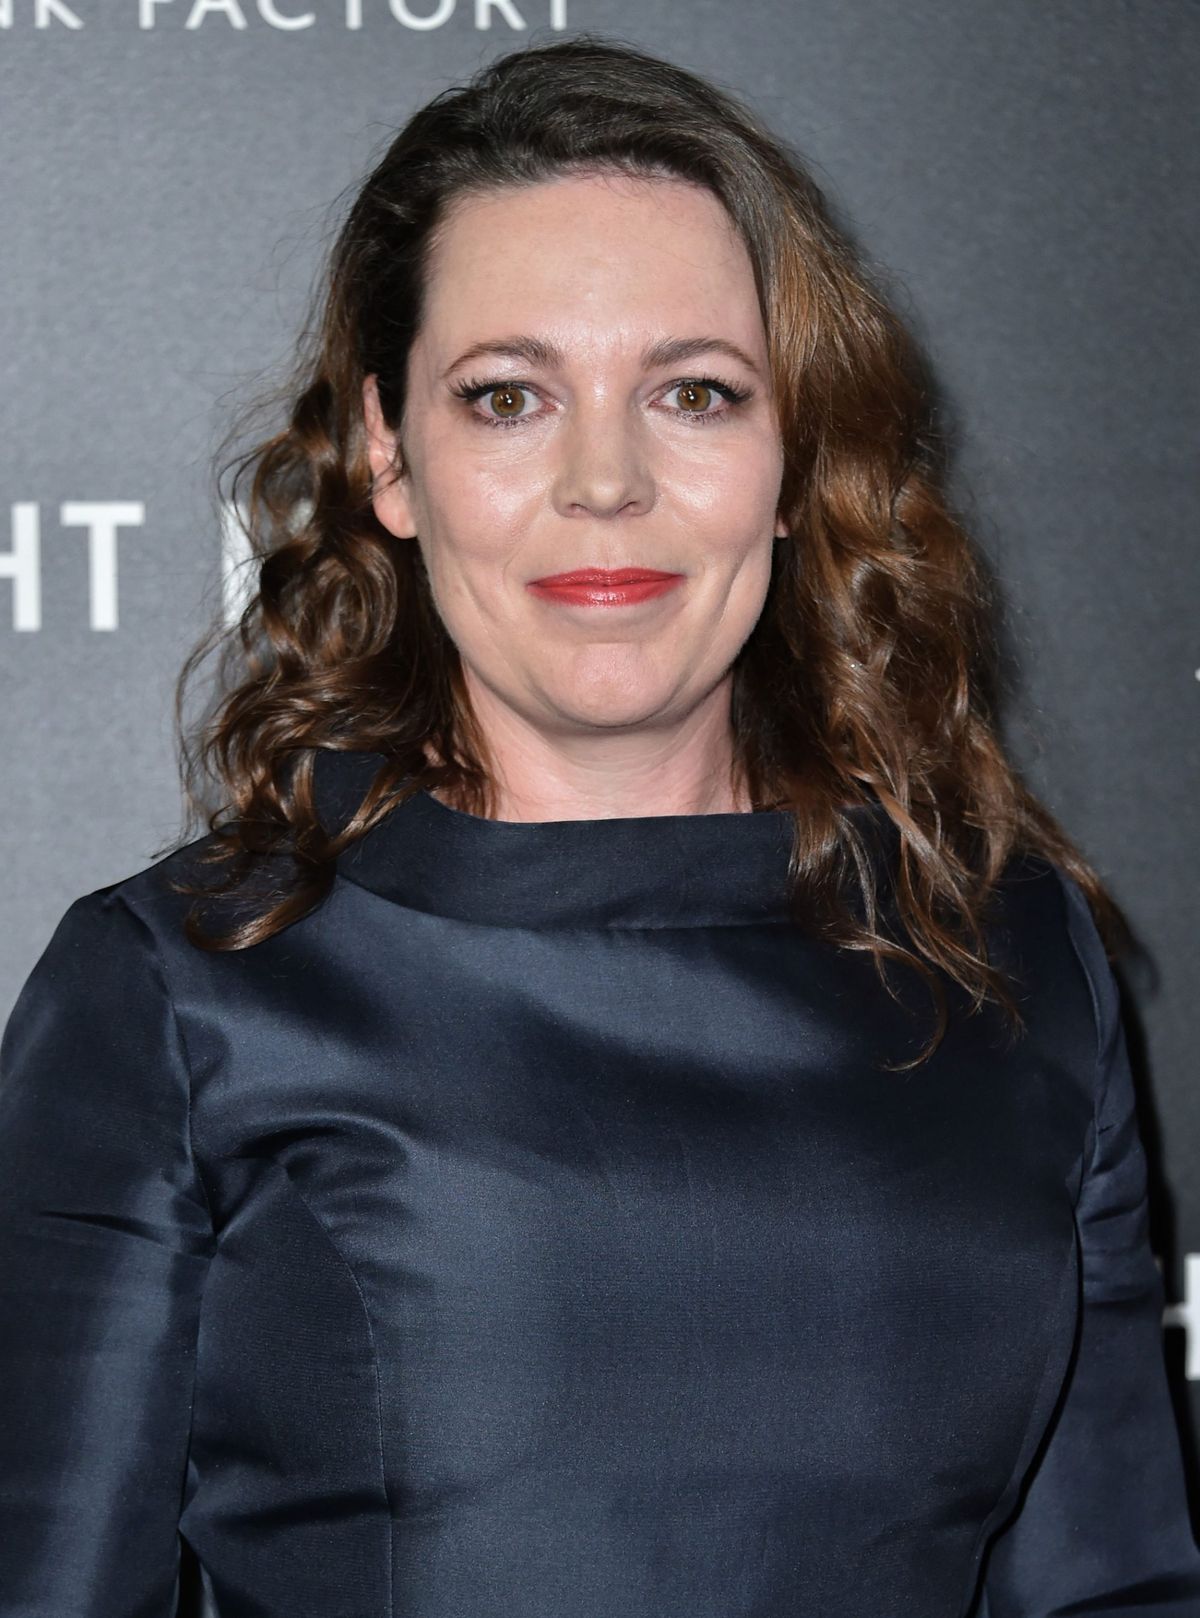 Interview Olivia Colman On Her Return To Comedy In Brand New Series